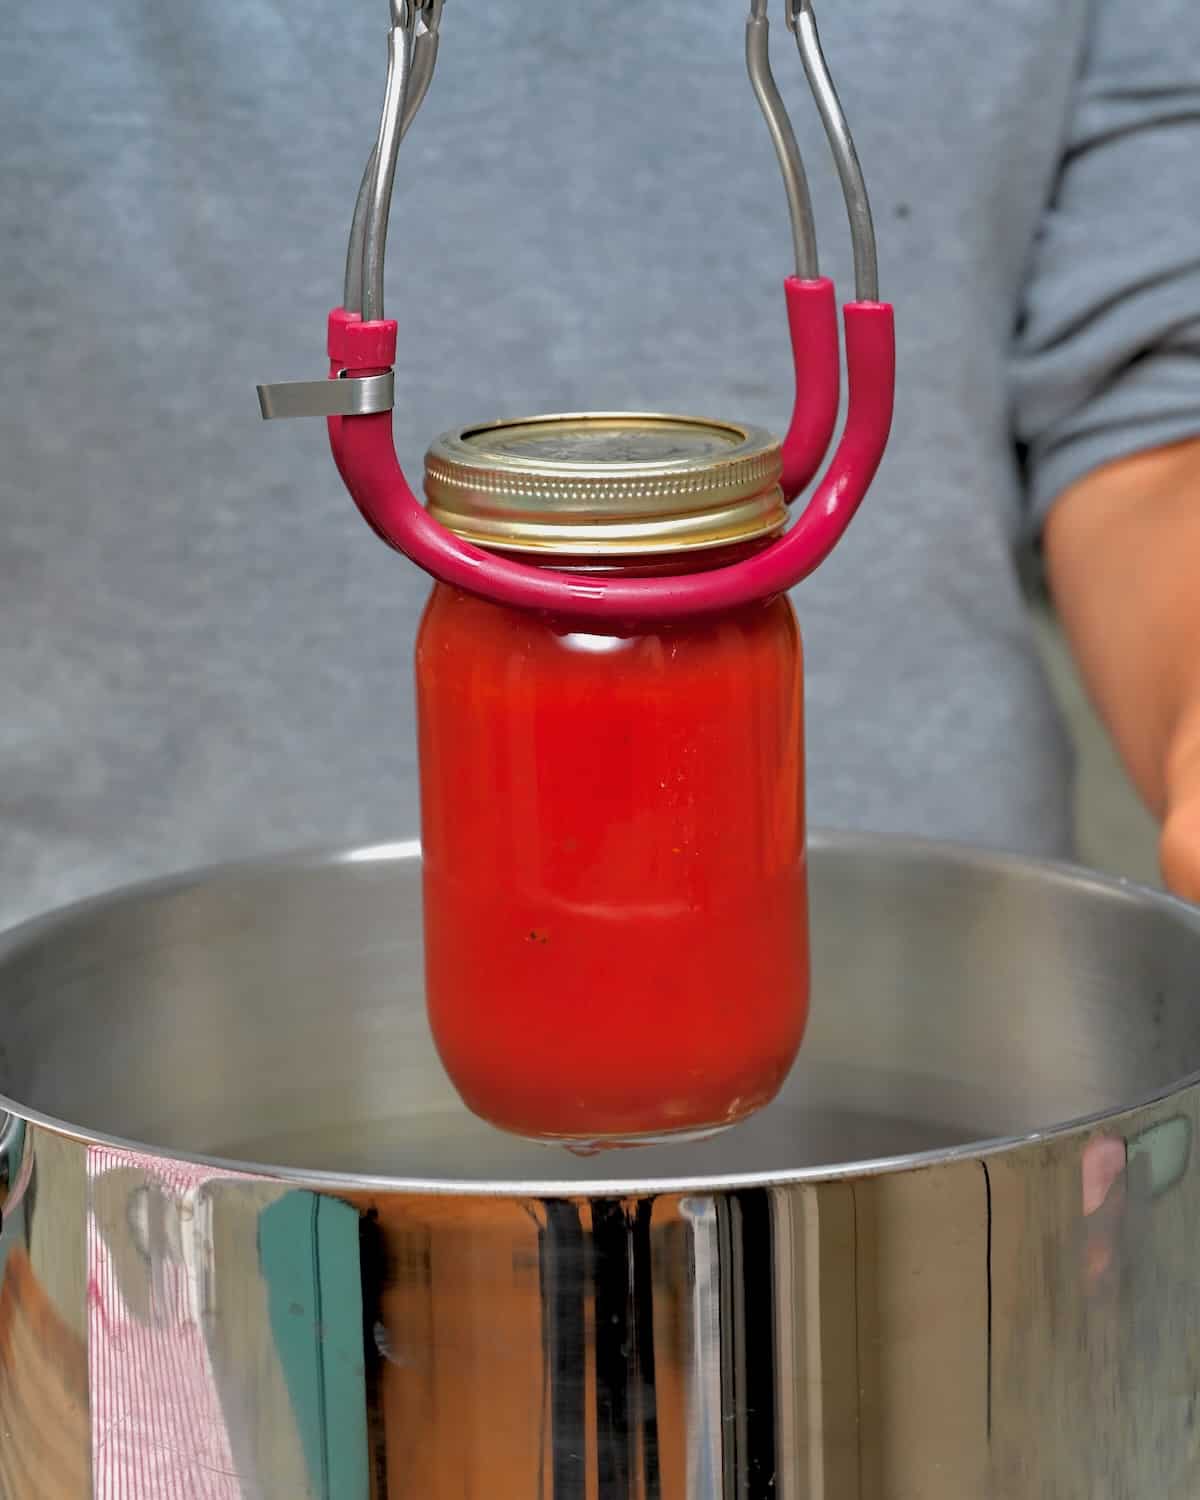 Placing a jar in a water bath canner